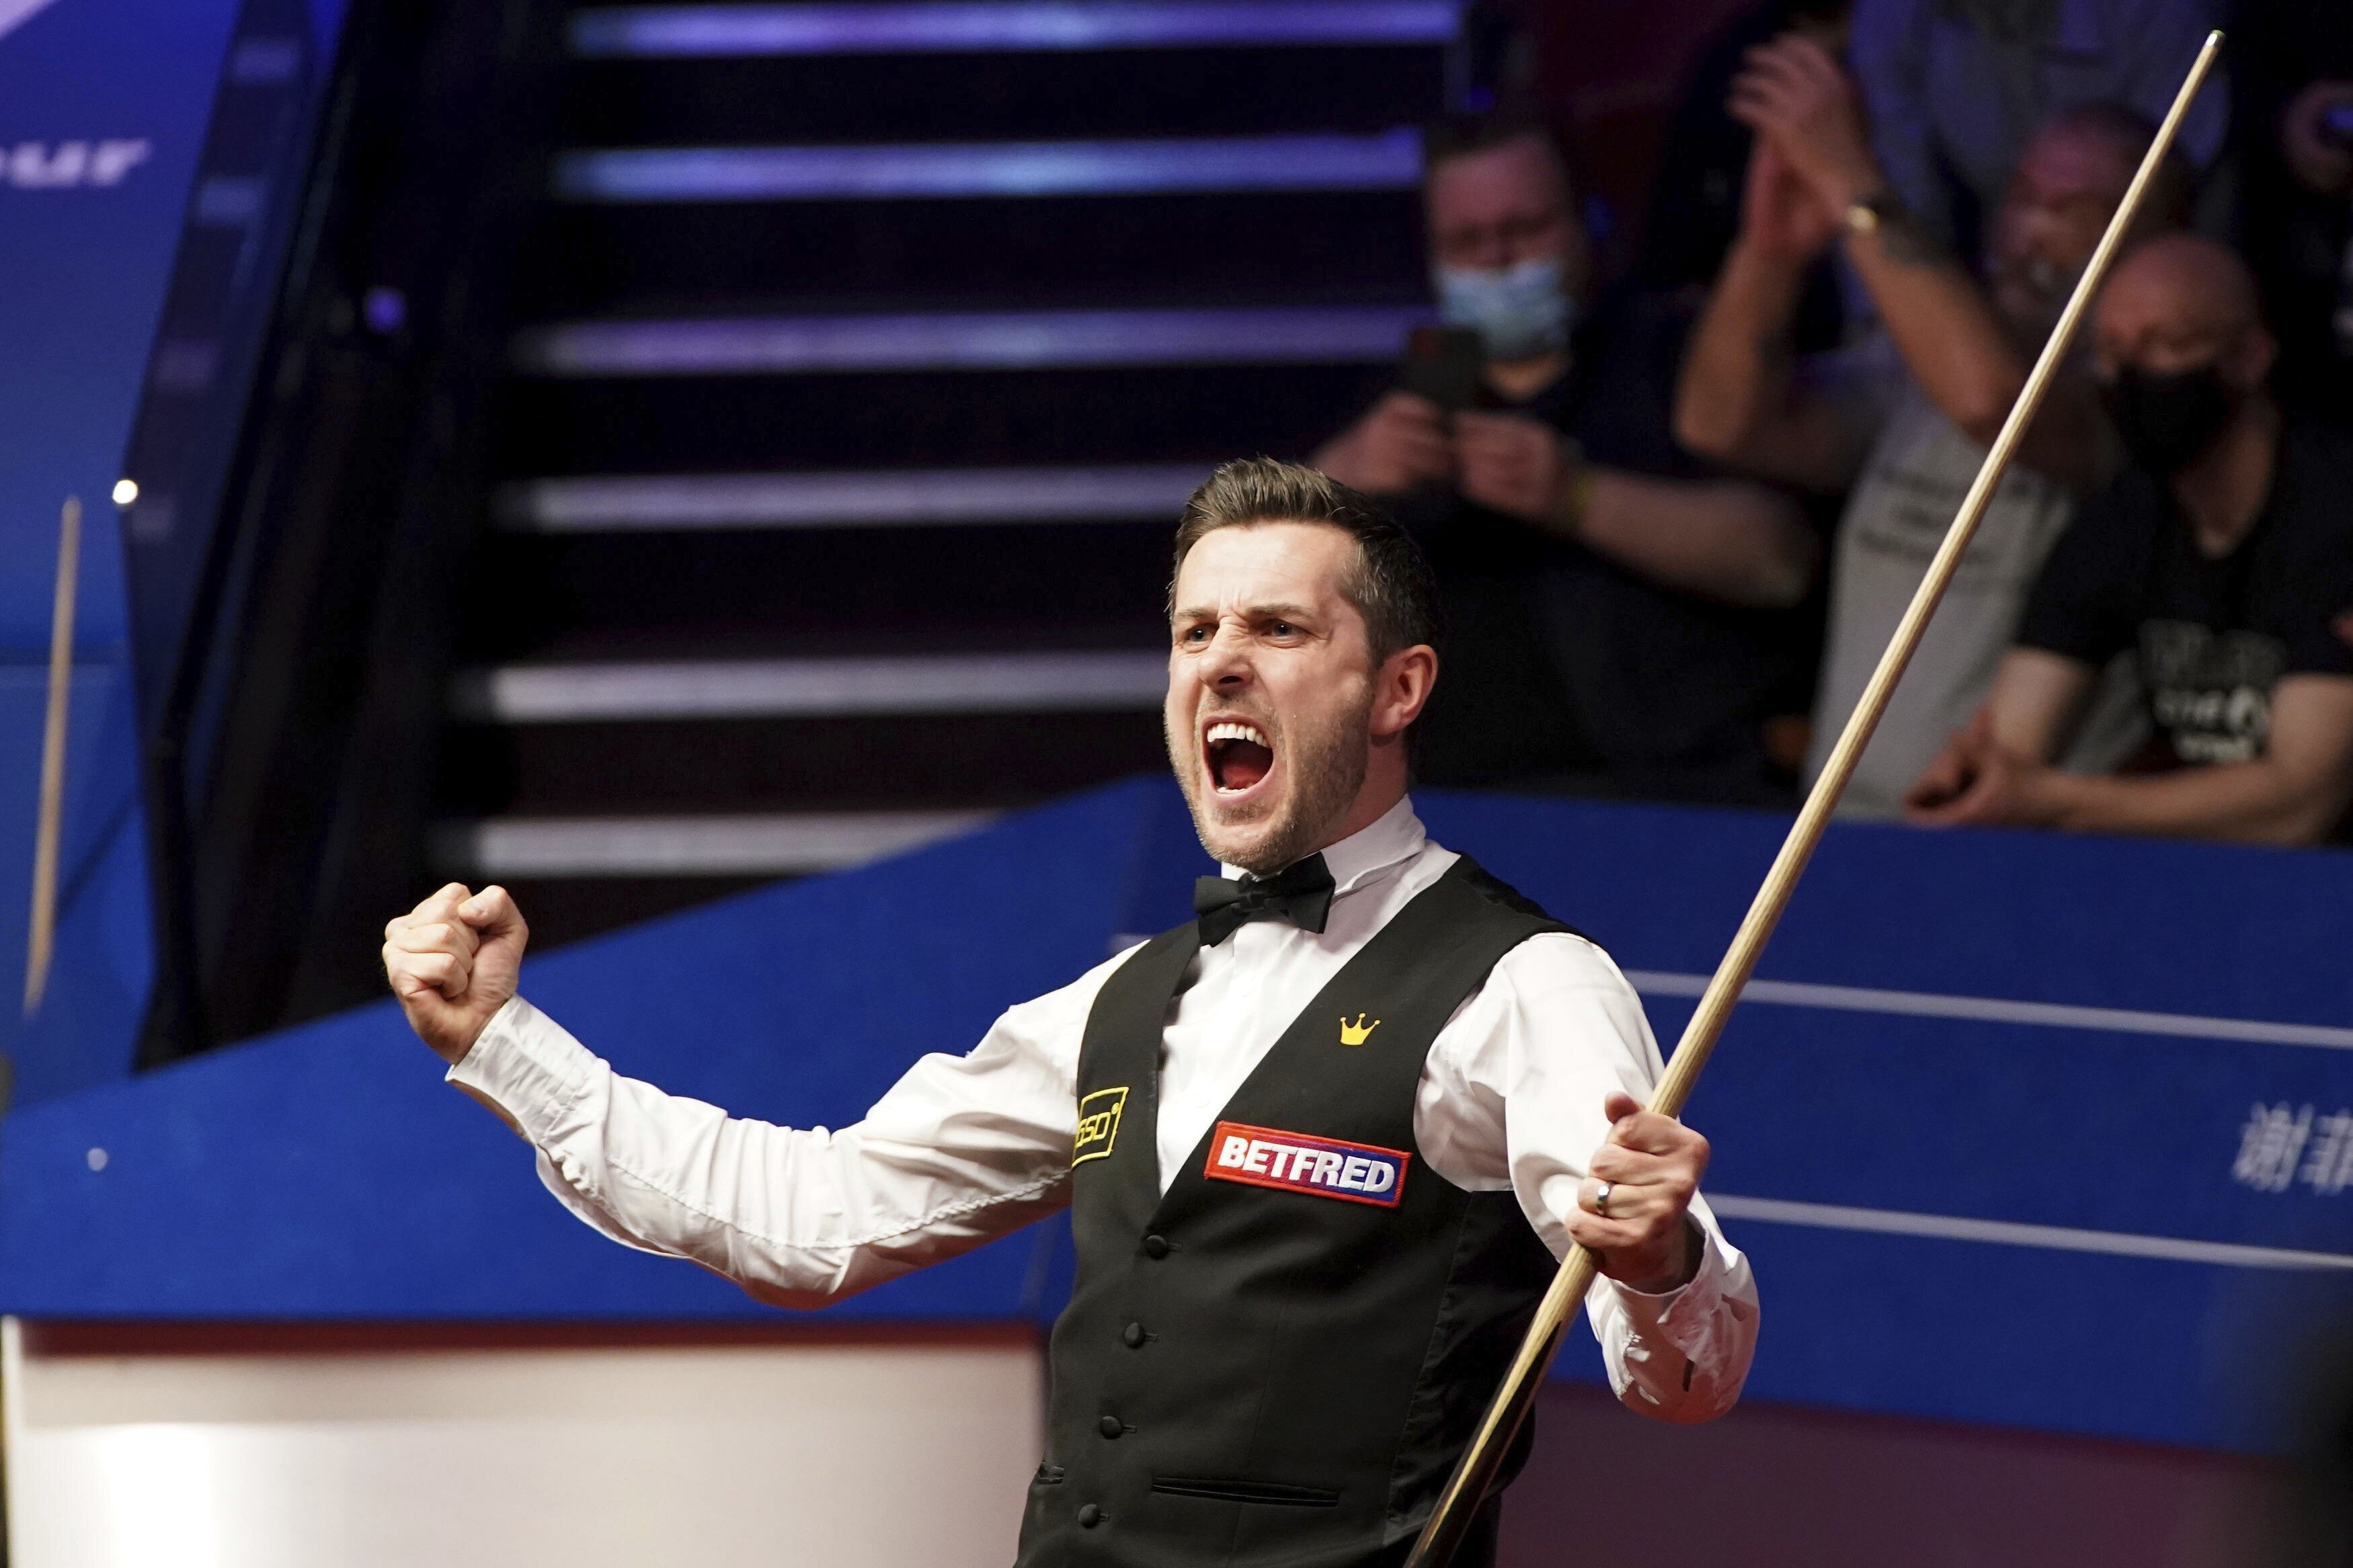 England’s Mark Selby celebrates winning the World Snooker Championships at the Crucible Theatre in Sheffield. Photo: AP